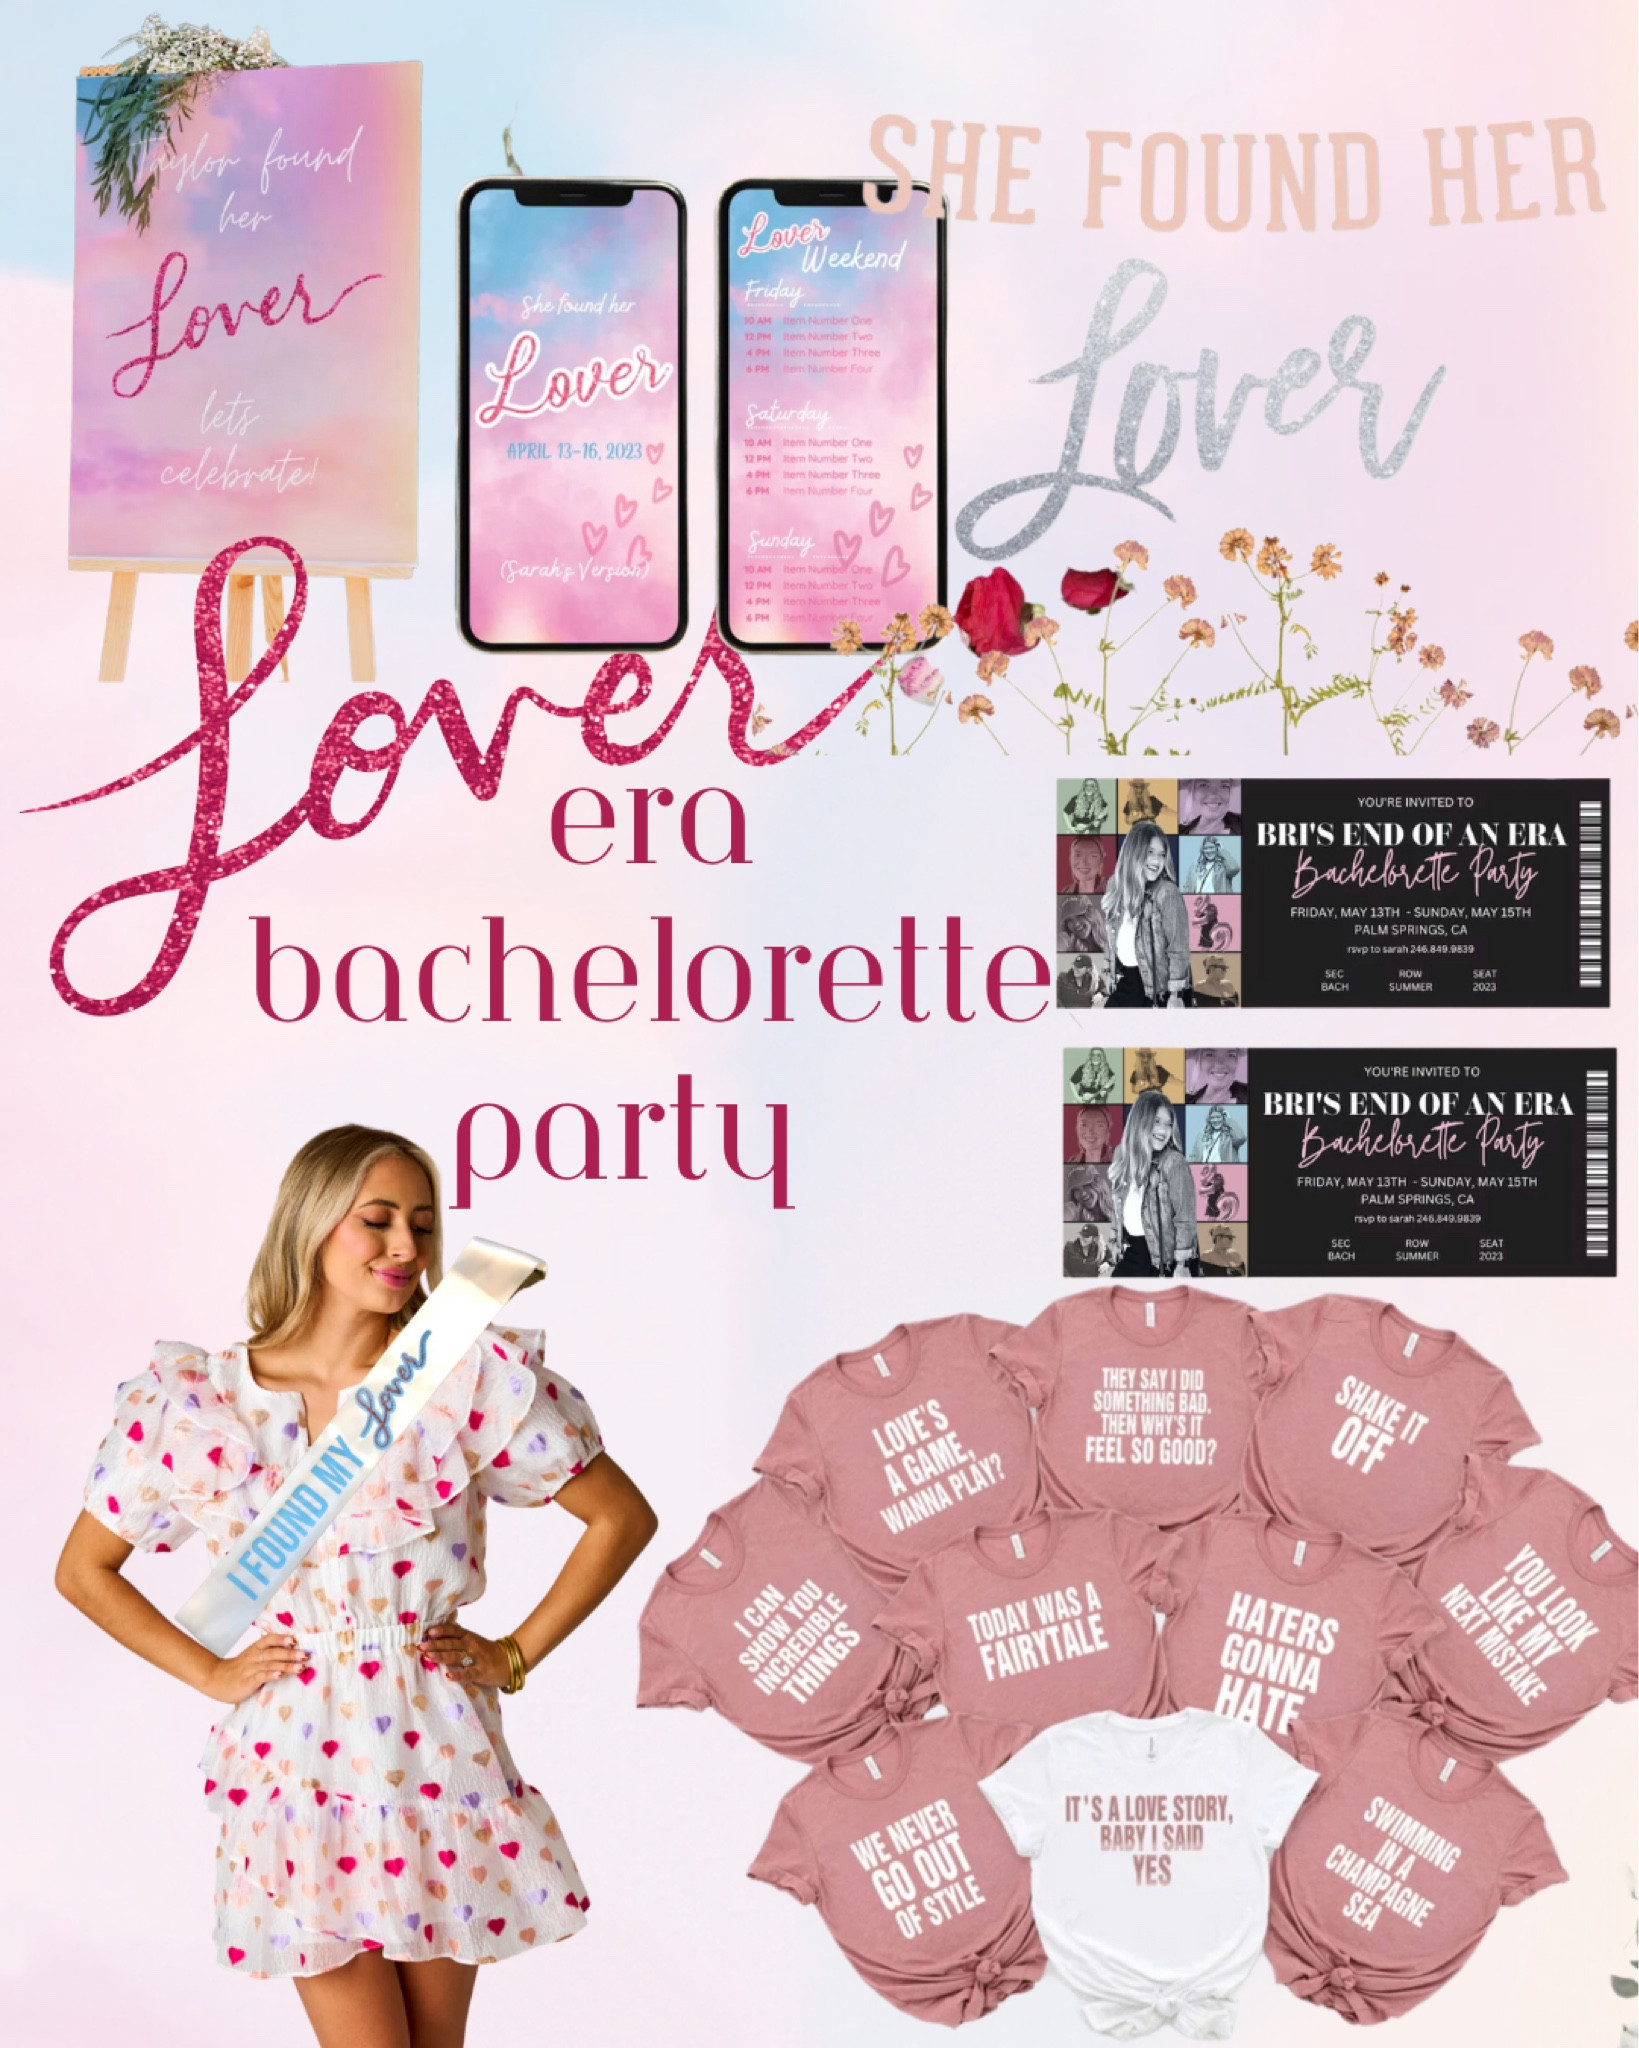 Taylor Swift Themed Party Games, 5 Ready to Play Games!